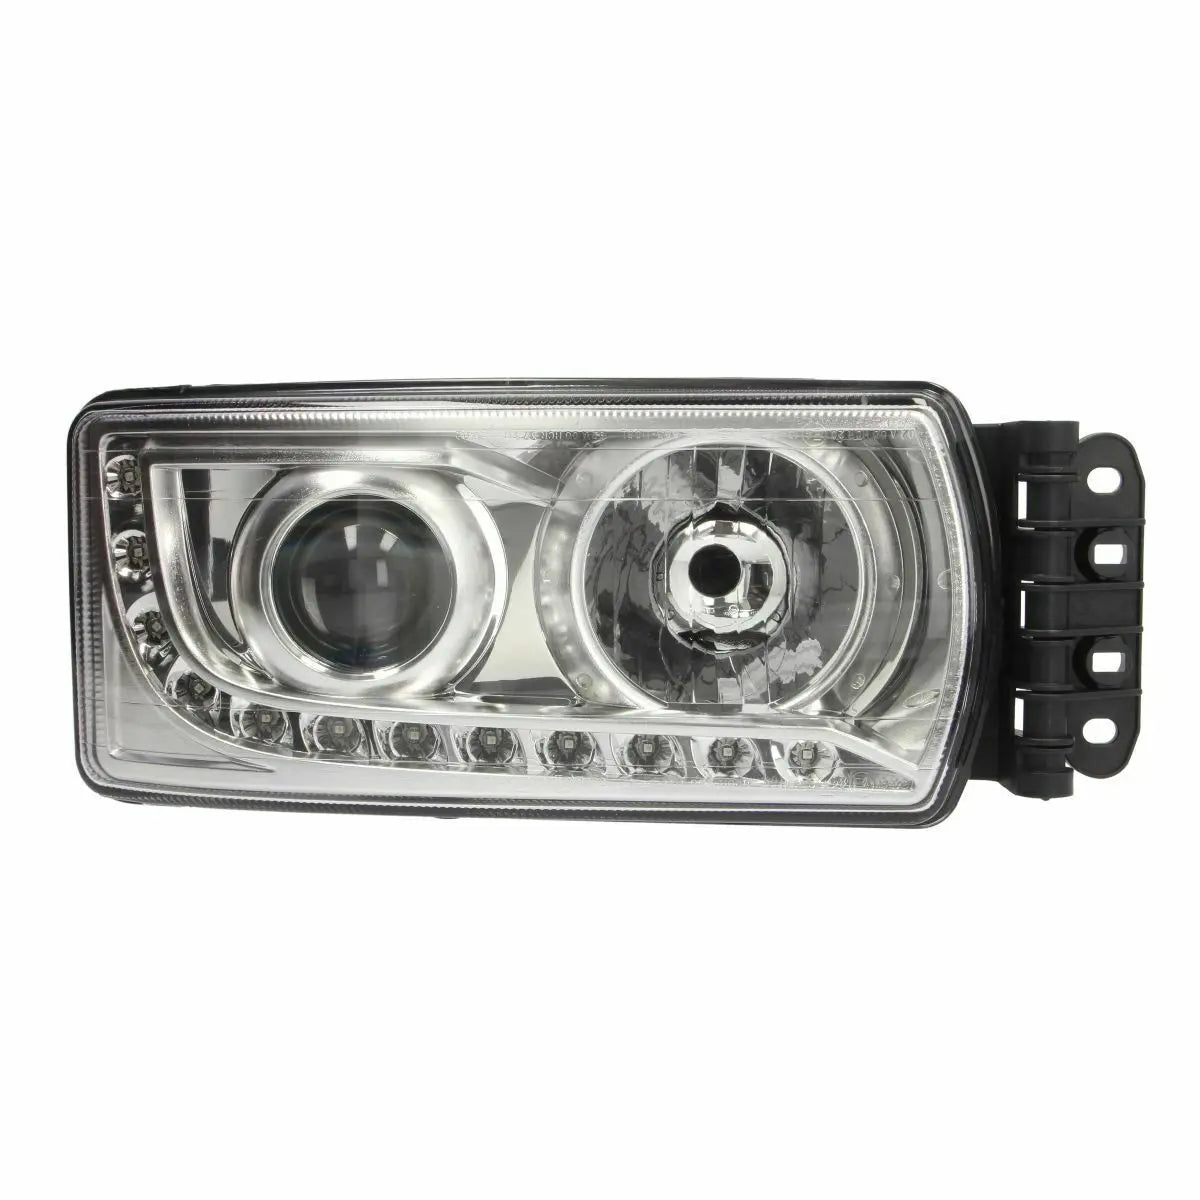 FANCHANTS 5801745448 Head Lamp Manual, With DRL, RHD, With E Mark, Without Bulb, Right FOR IVECO TRUCK FANCHANTS Aftermarket Auto Parts